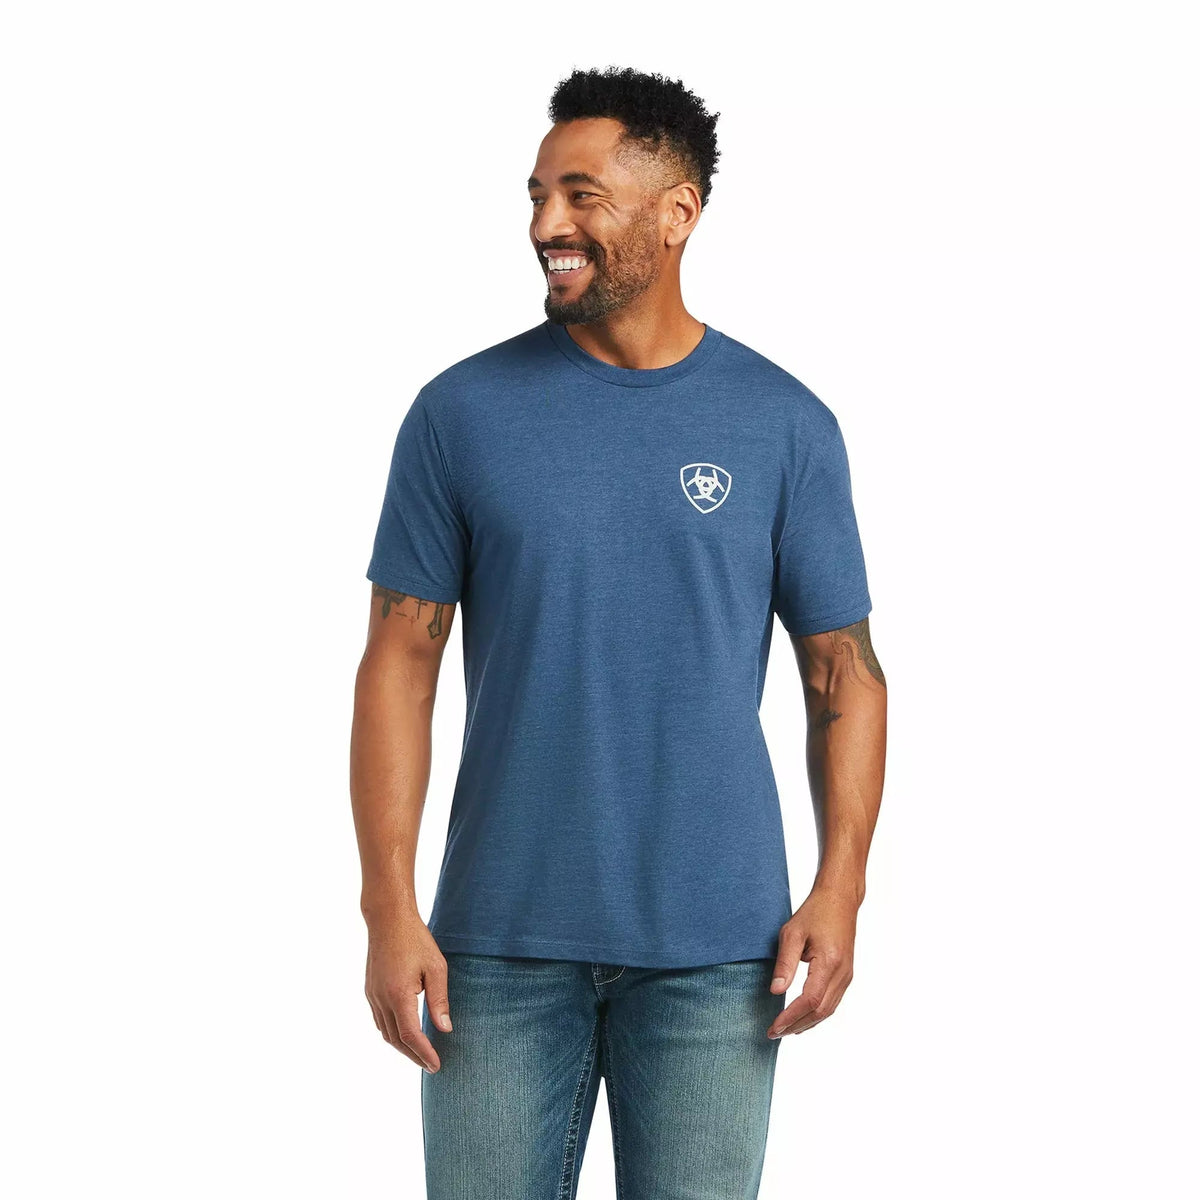 ARIAT CLOTHING Ariat Mens Tee Rope Shield